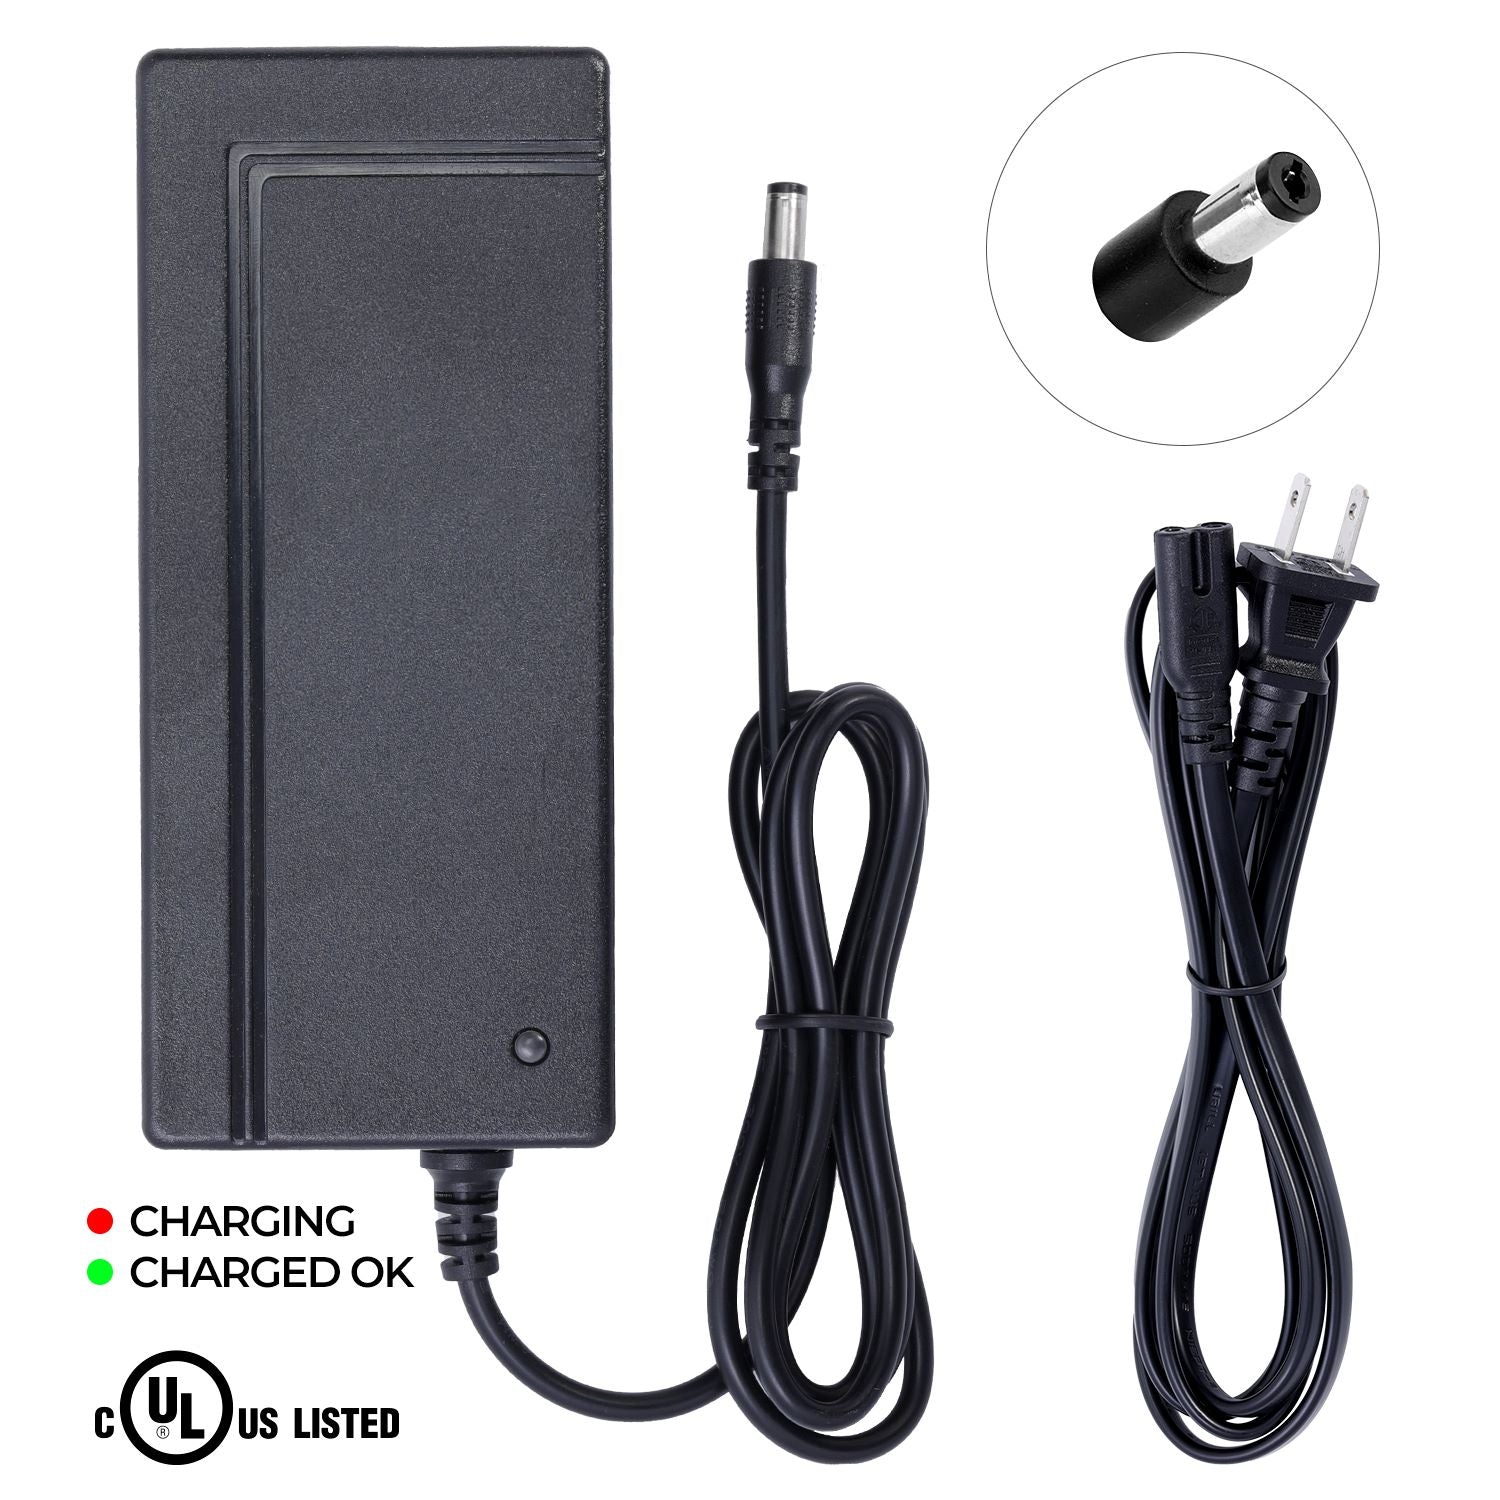 UL Certified Charger for Swagtron Swagcycle SC-1 Electric Bike